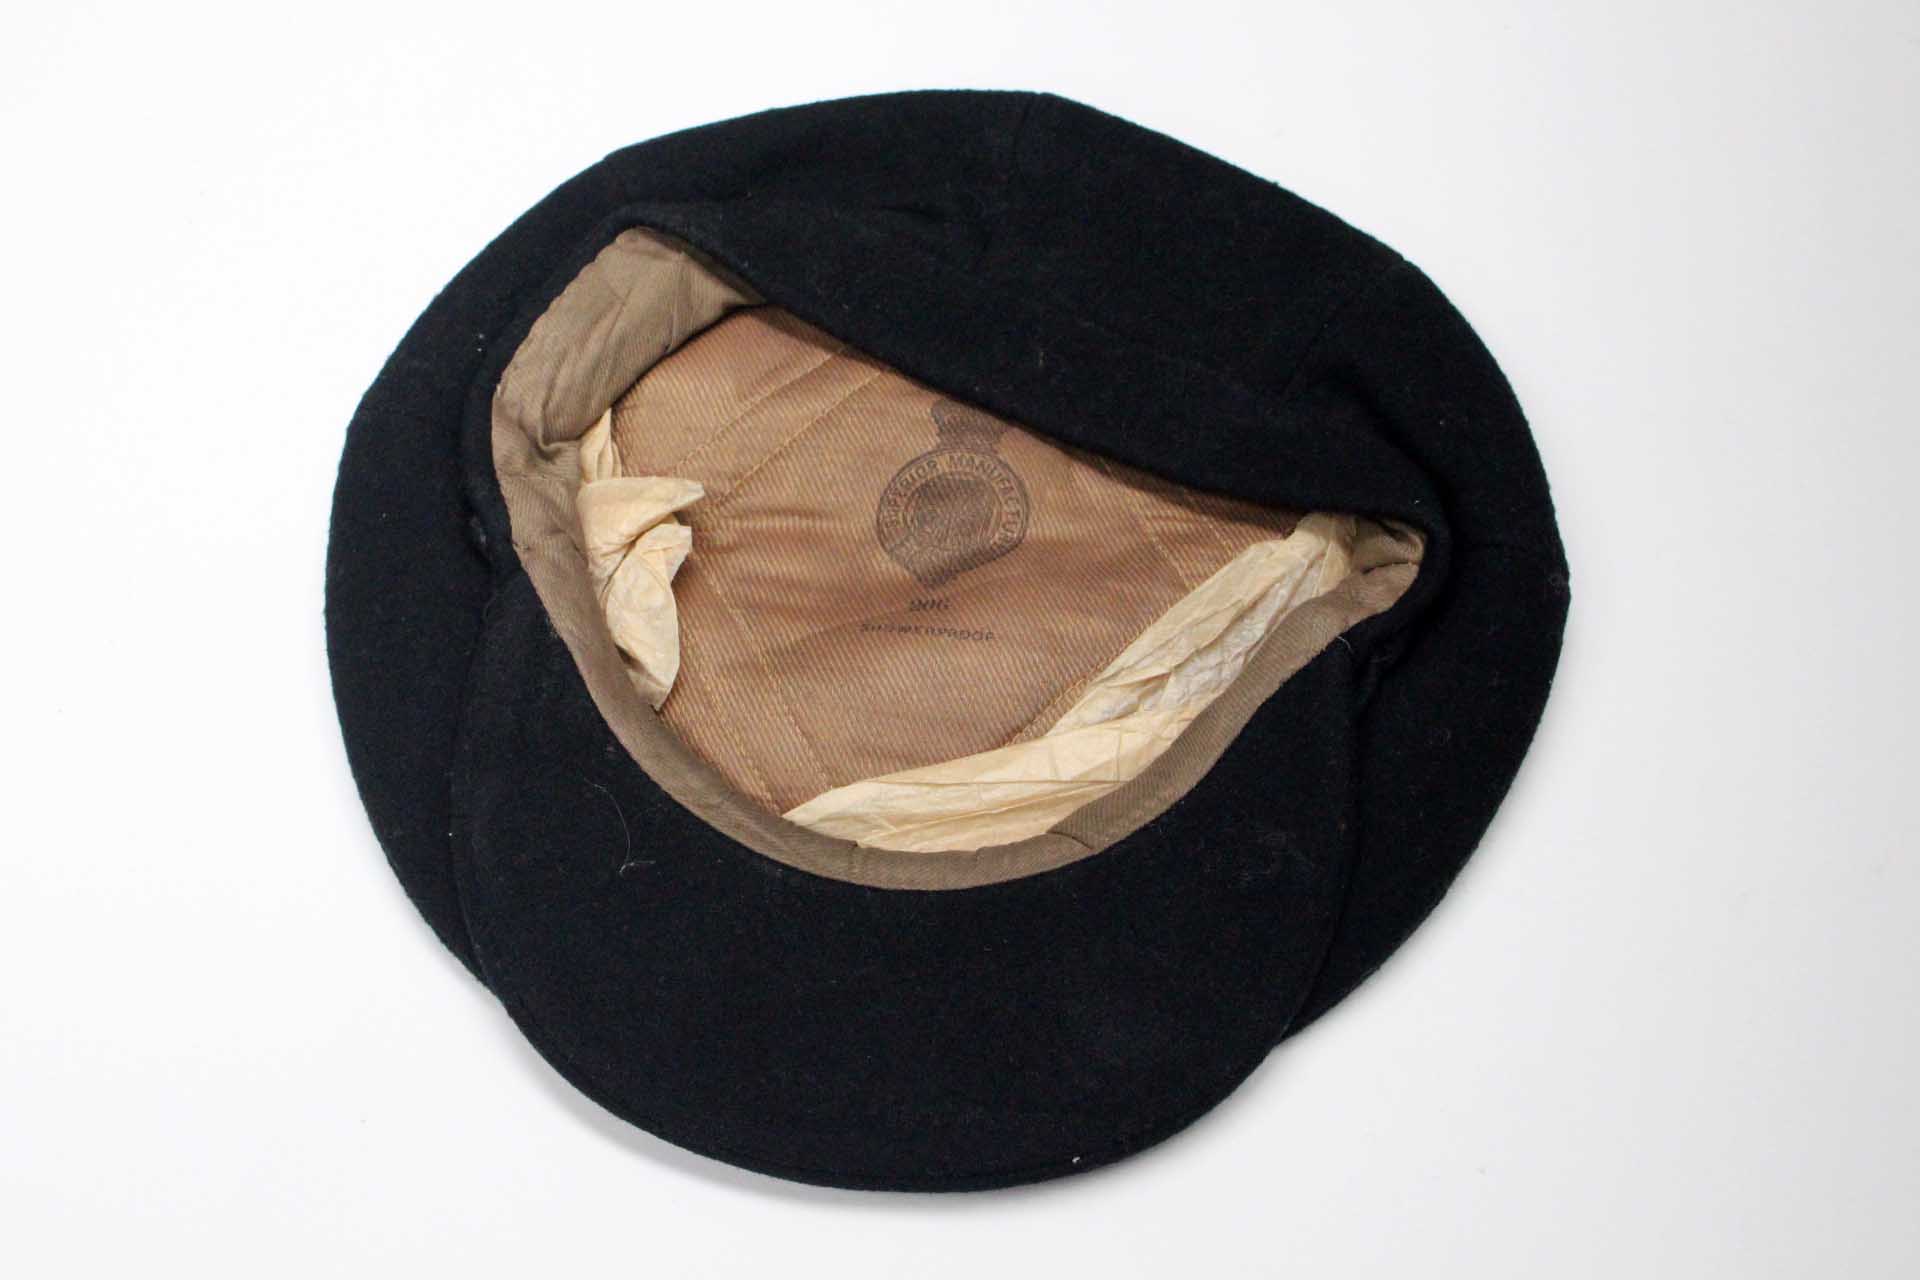 An early 1900's mans working cap, black wool, canvas lining, by Superior Manufacturing Co.